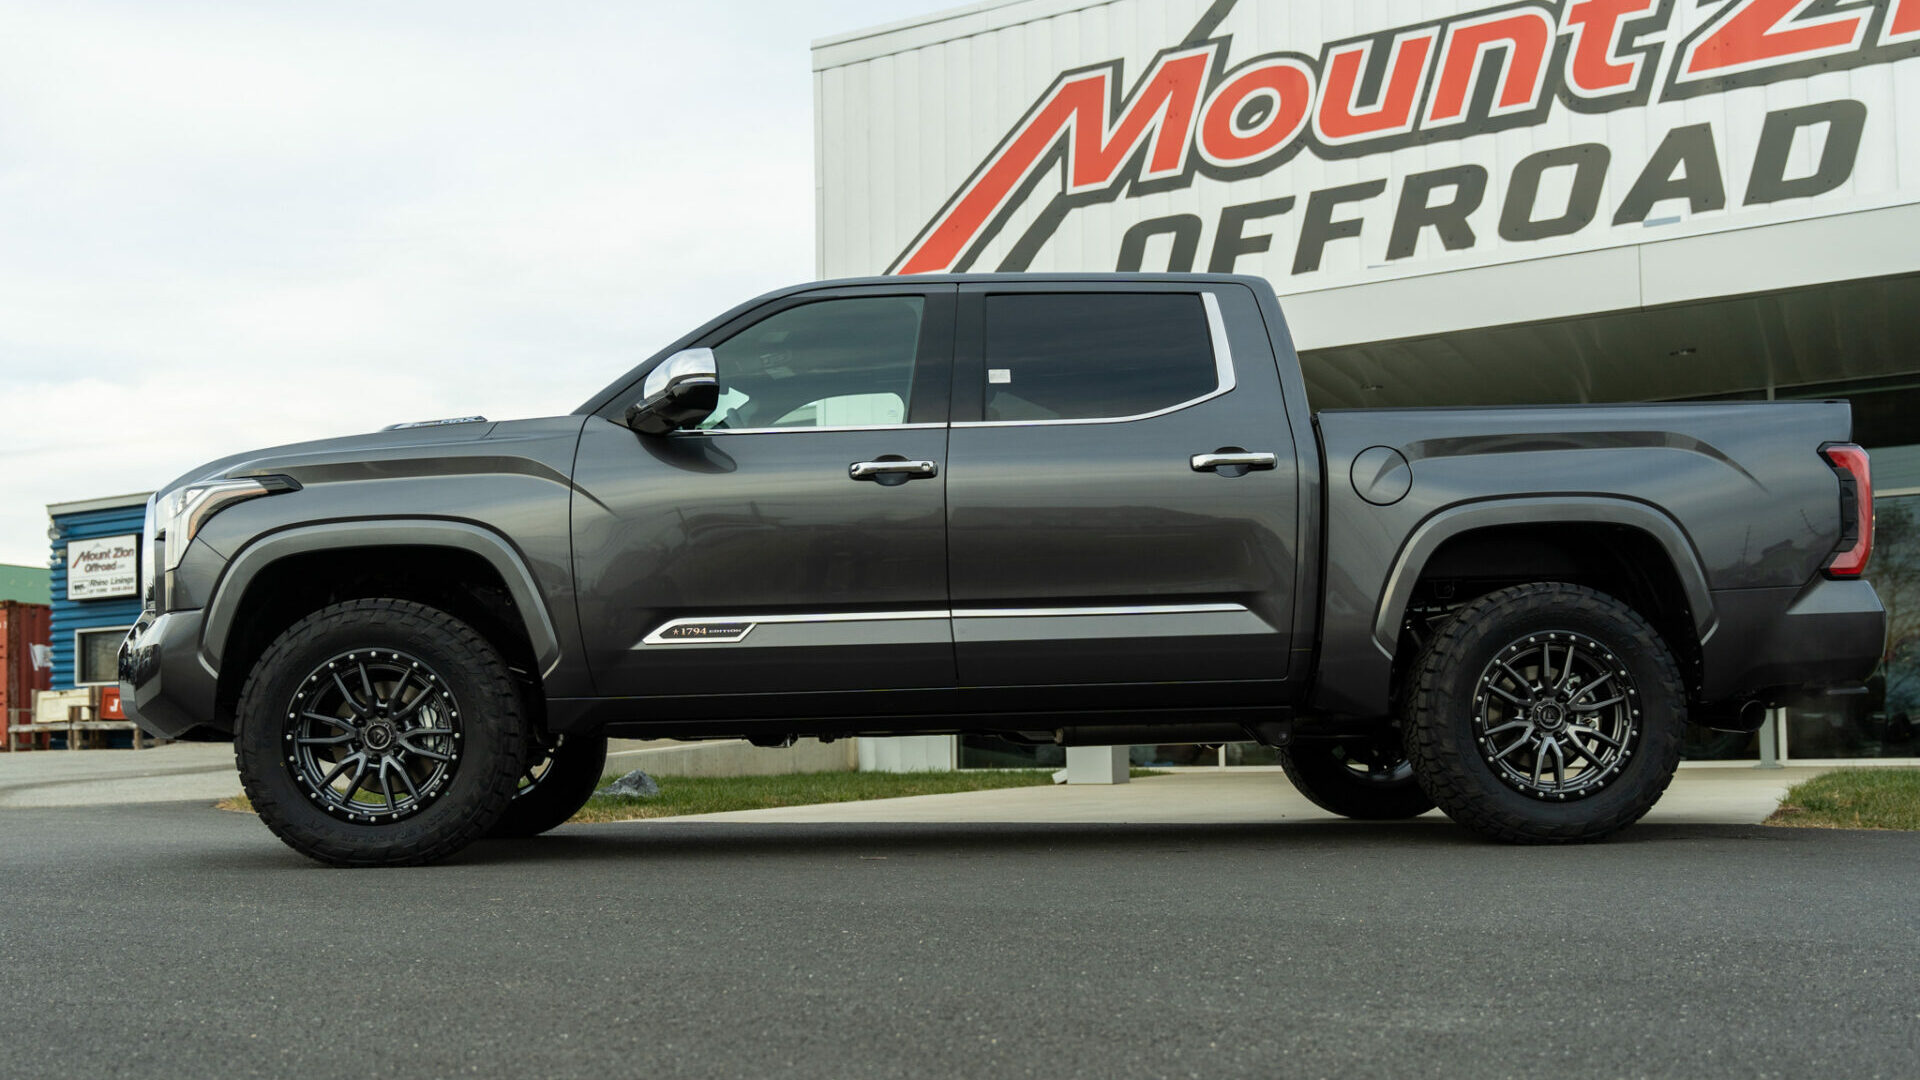 Toyota Tundra with Fuel wheels driver side at mount zion offroad